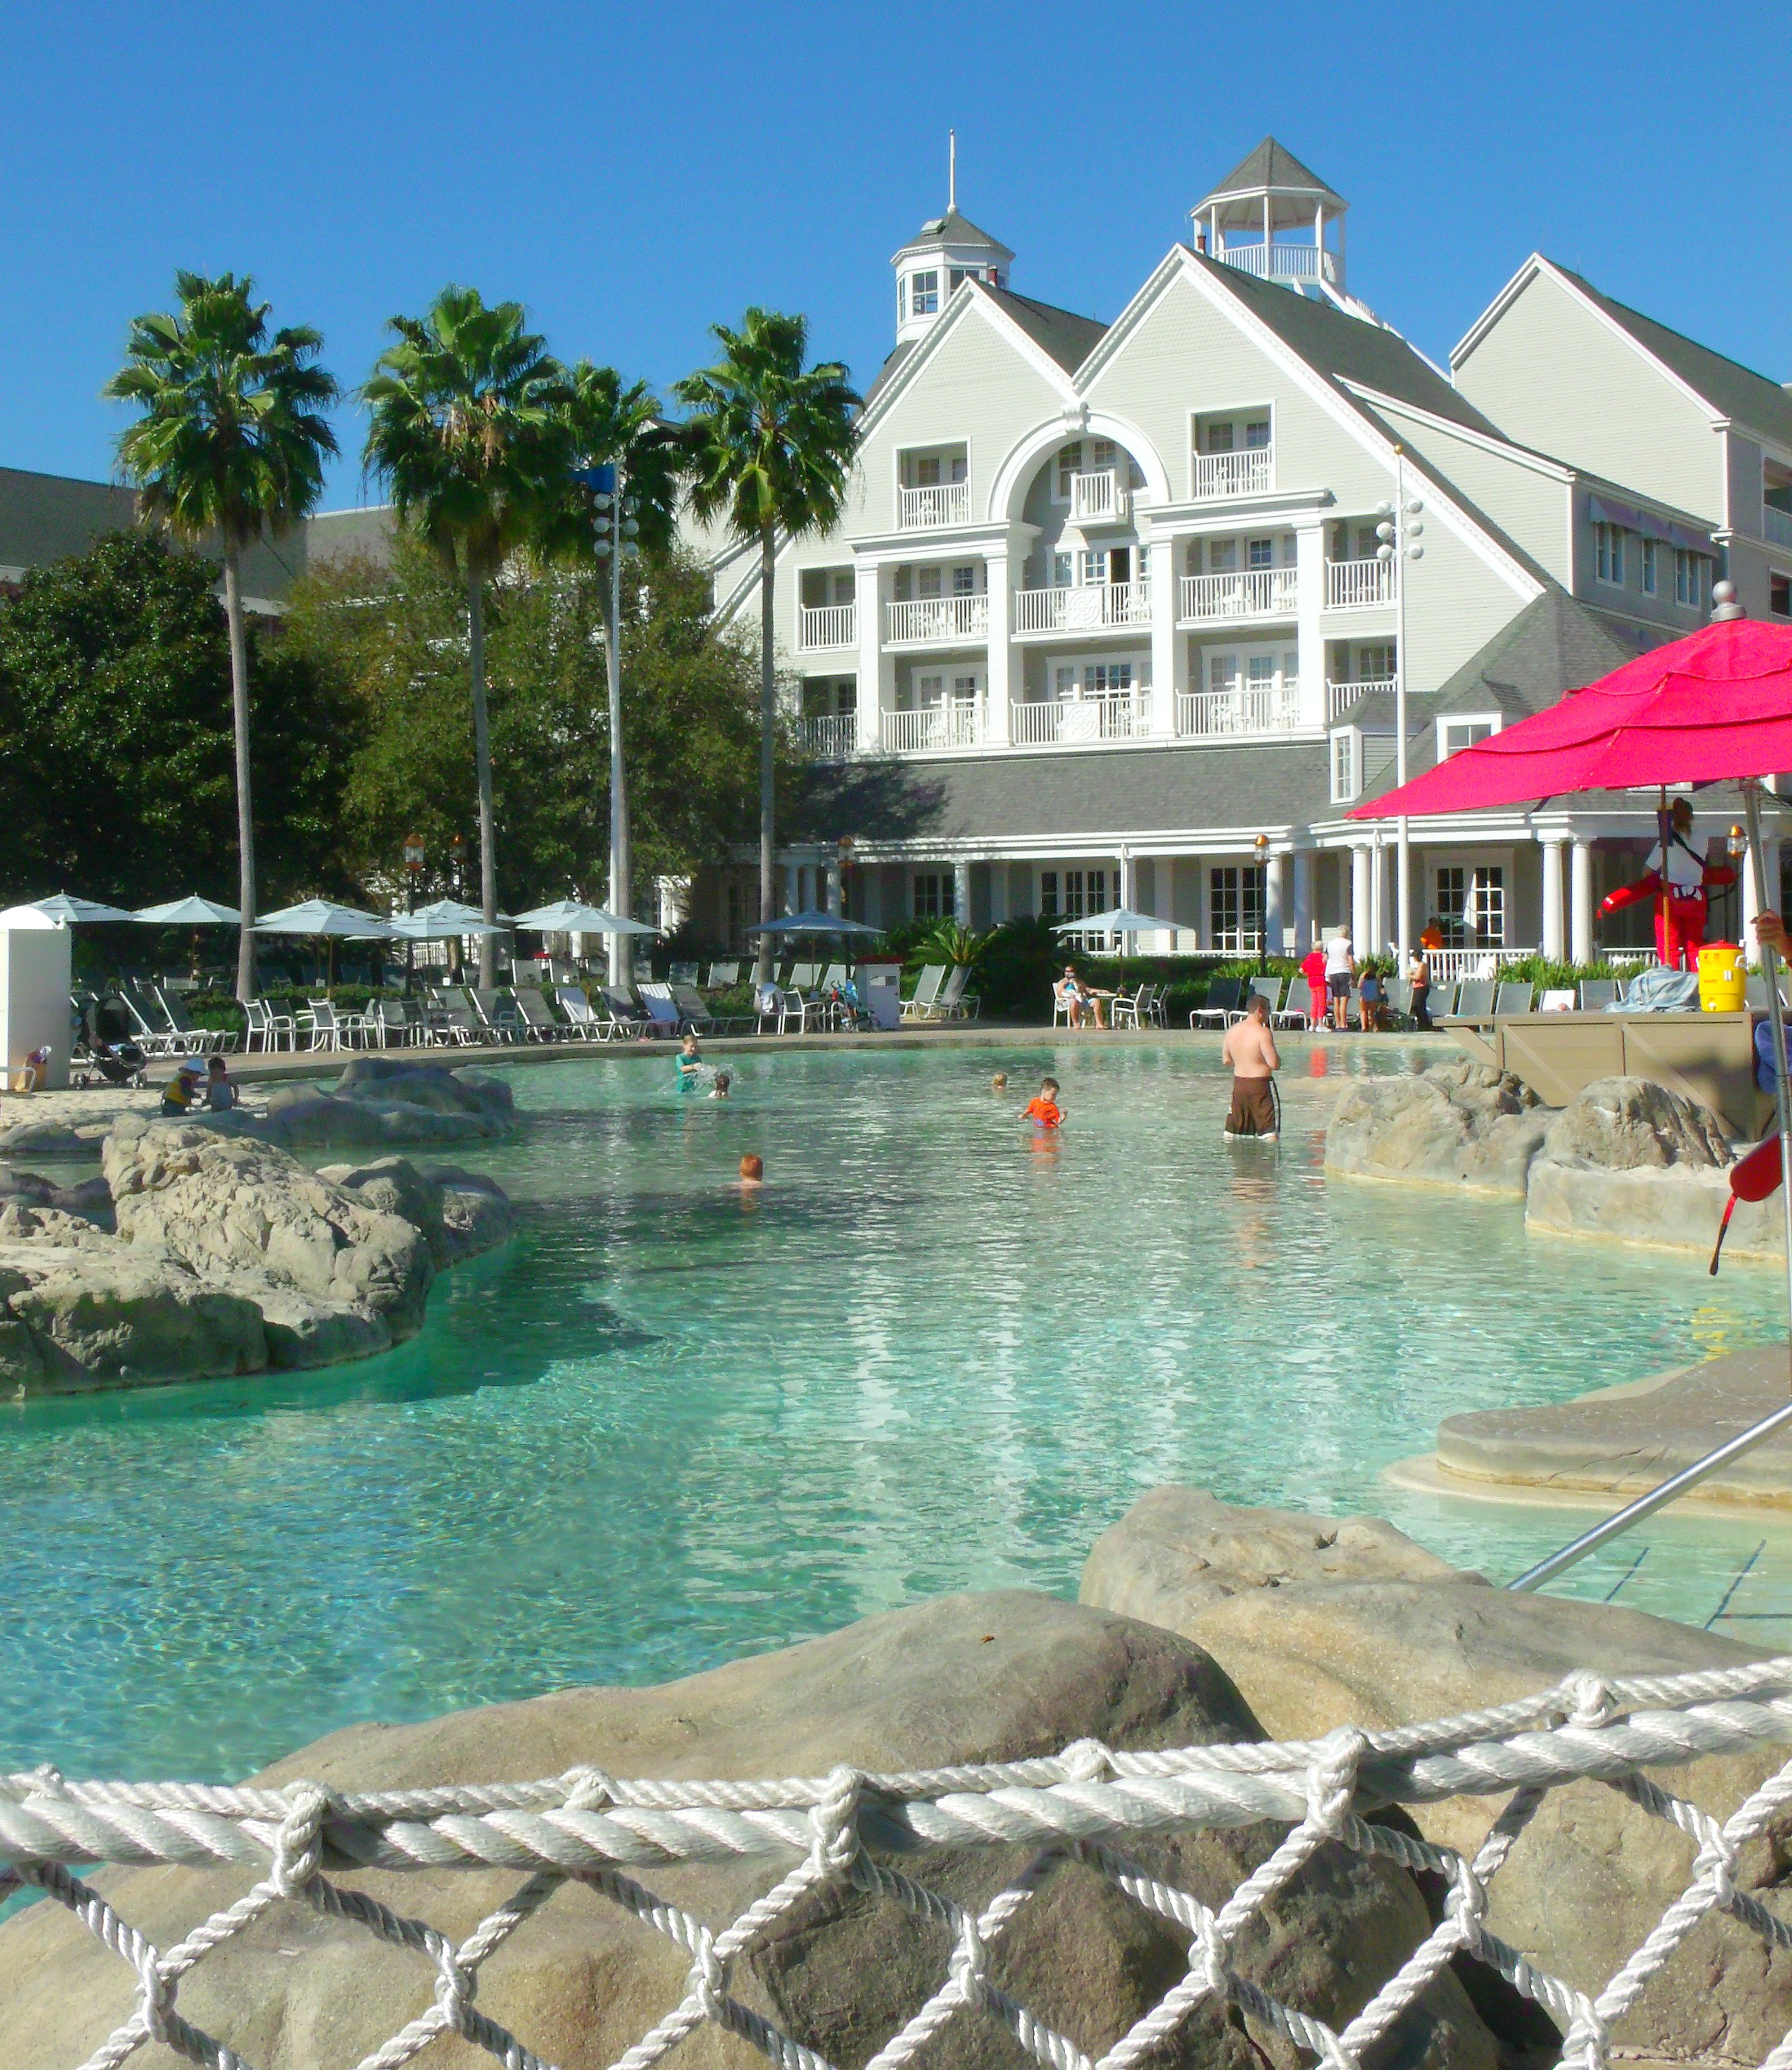 Disney's Beach Club Resort with pool in the foreground